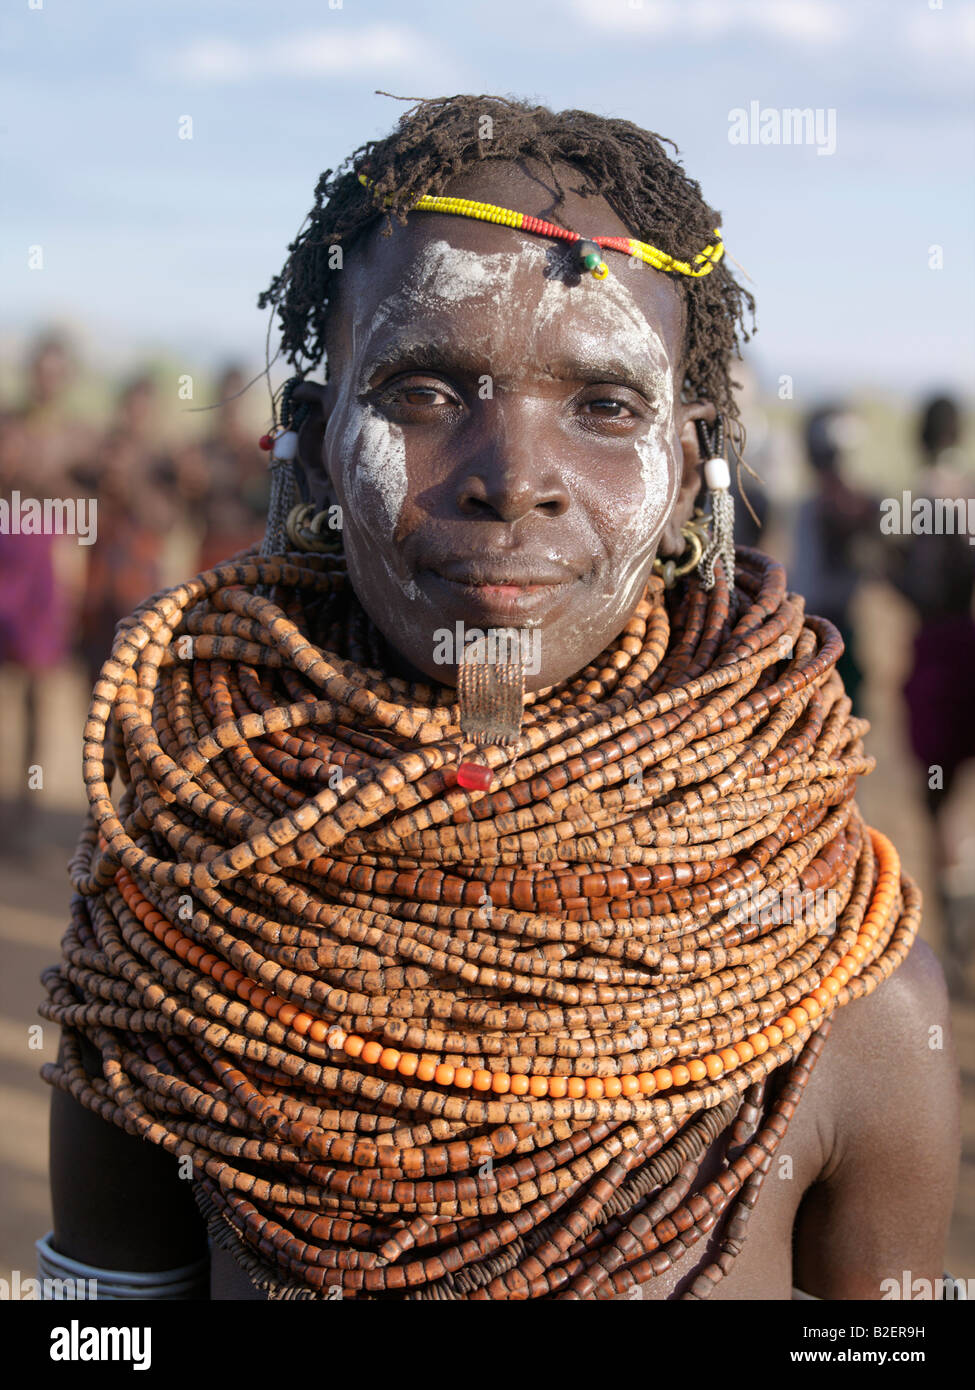 A Nyag'atom woman, her face painted in readiness for a dance, wears a lip ornament in the hole pierced below her lower lip. Stock Photo